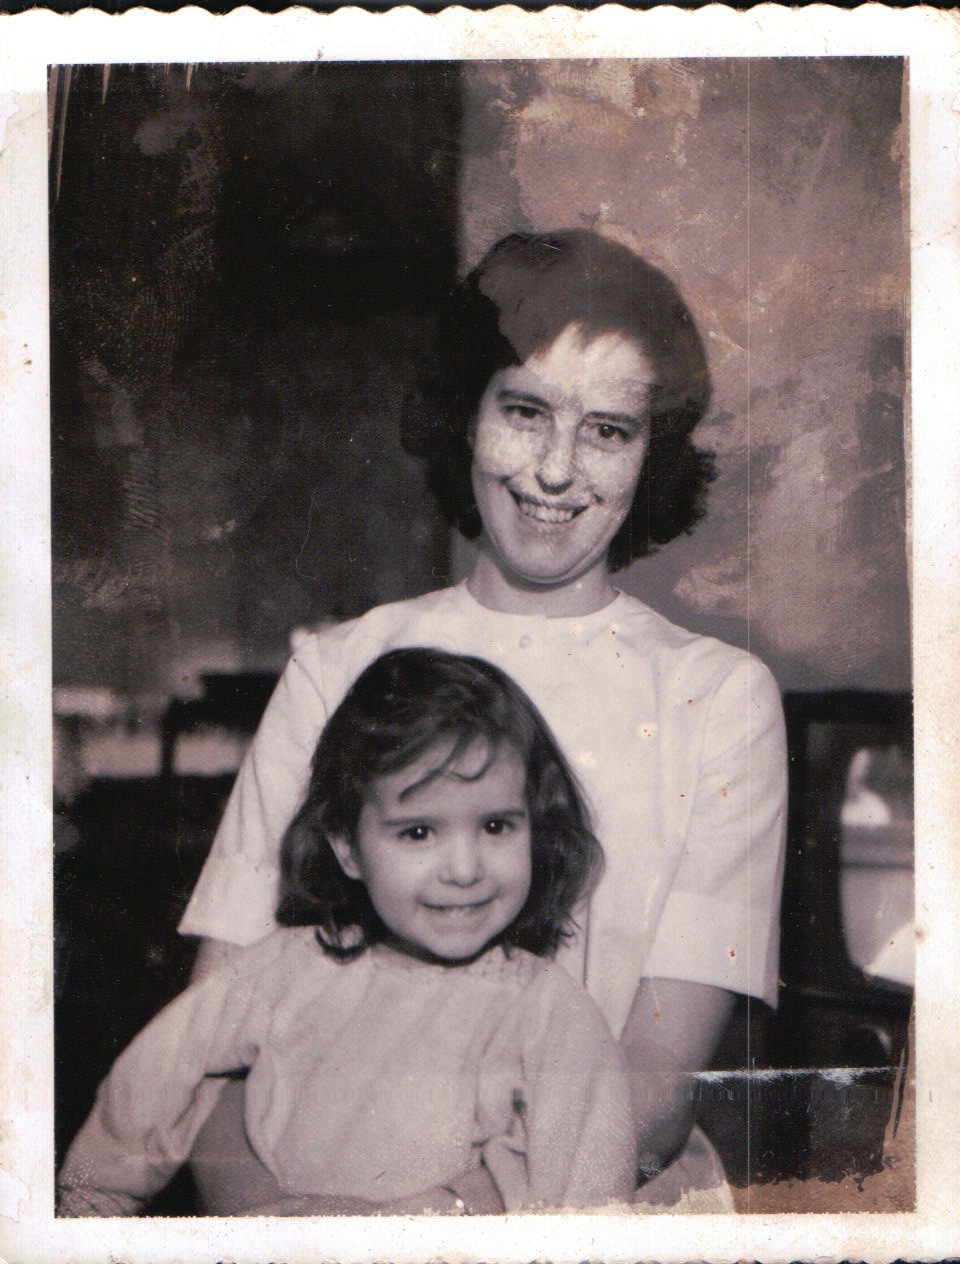 1962 - Virginia and her daughter, Sharon